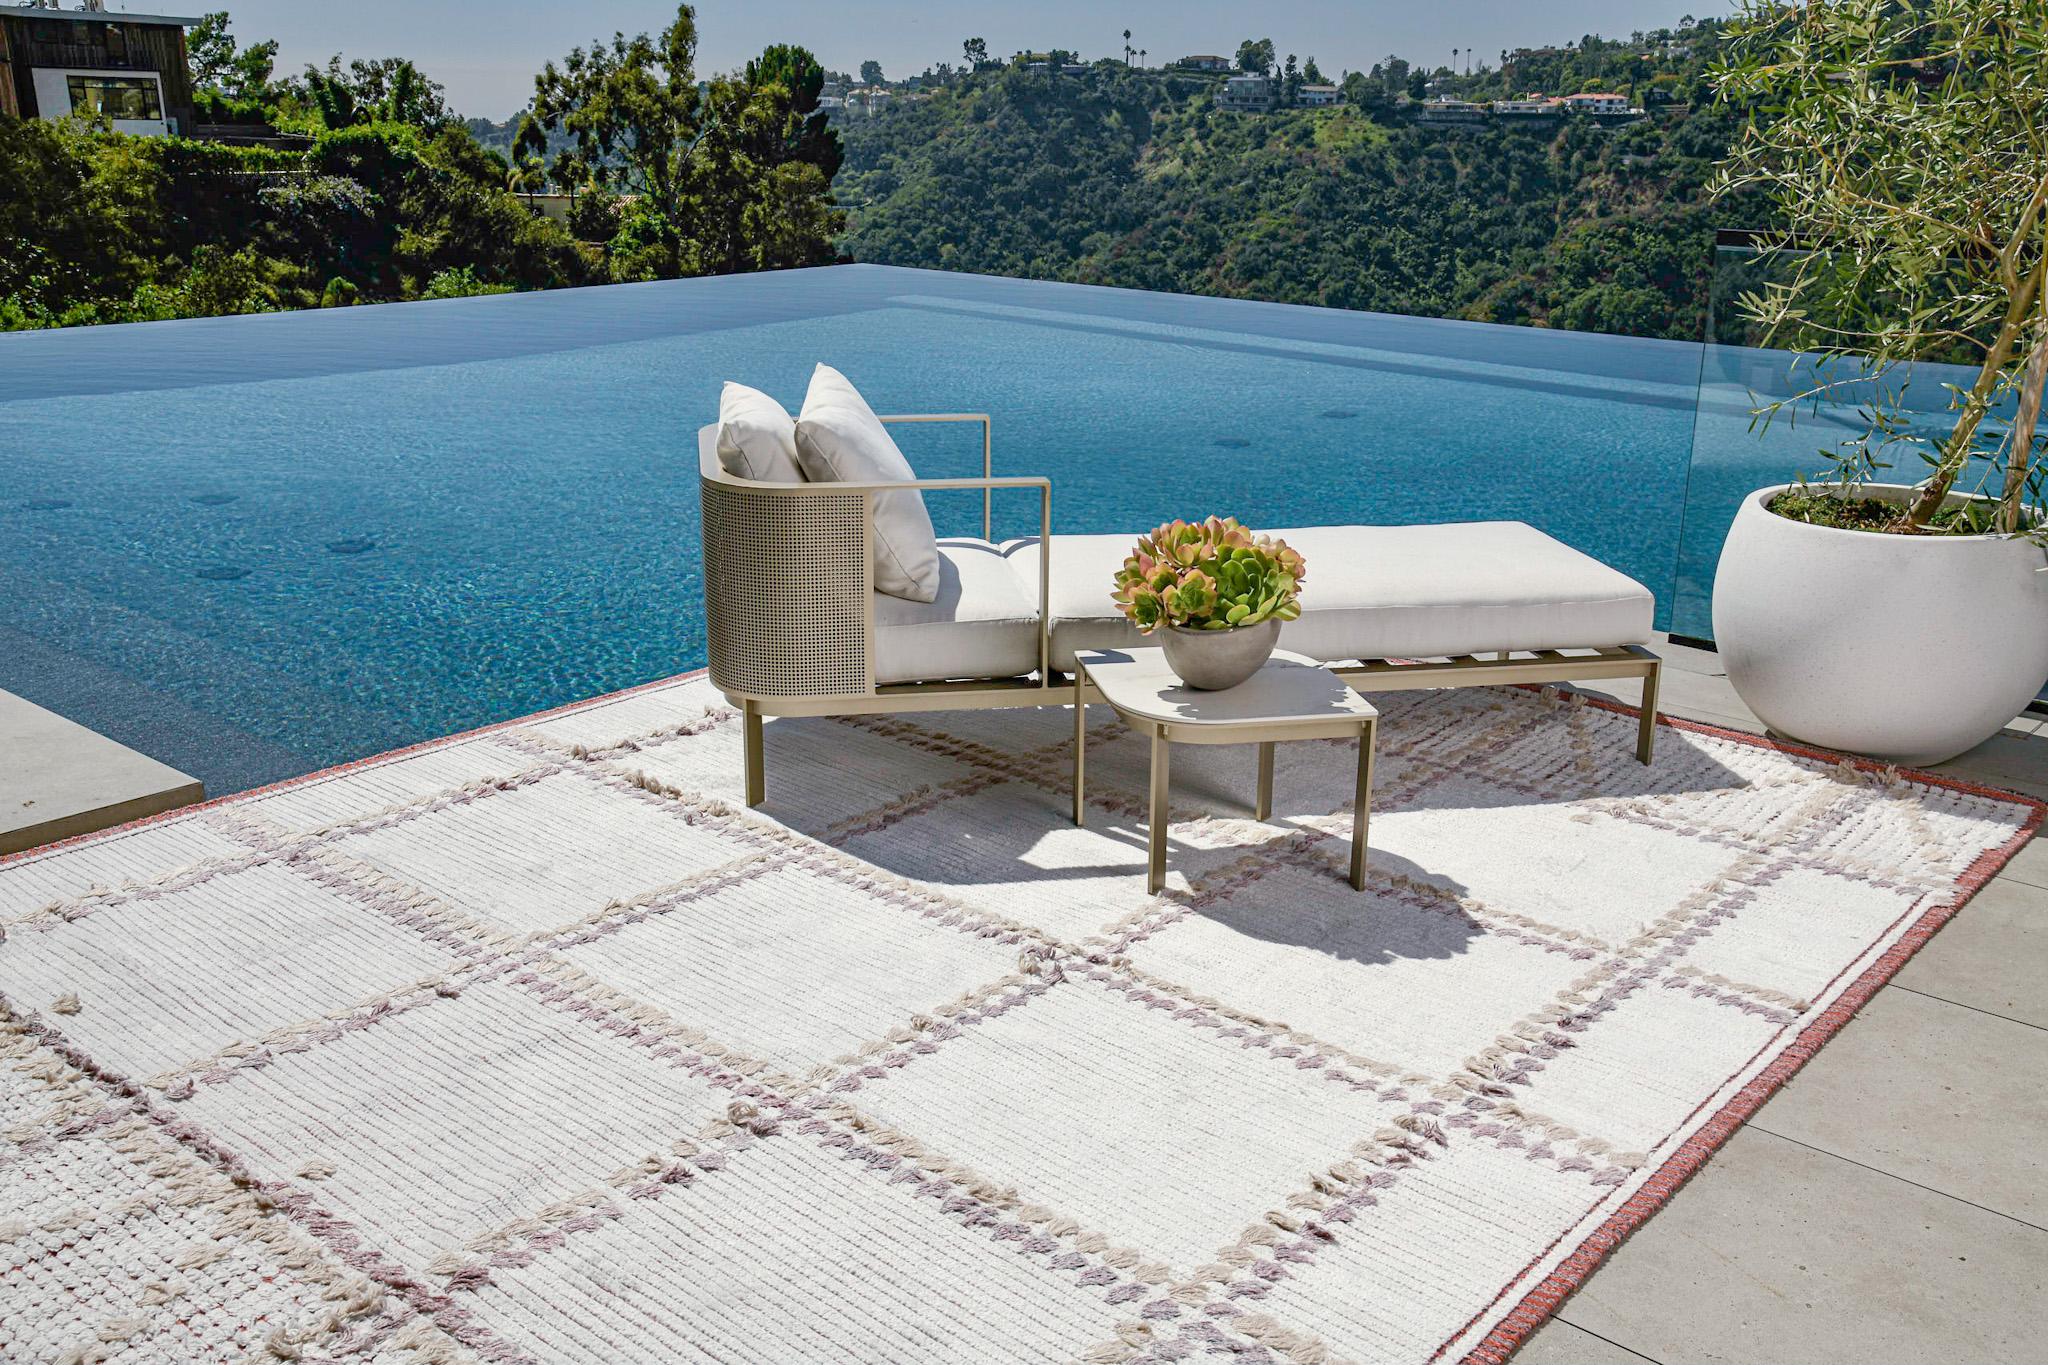 Enjoy the fresh air with Nasim, rugs that work indoors and out.

Rug Number
31443
Size
9' 1